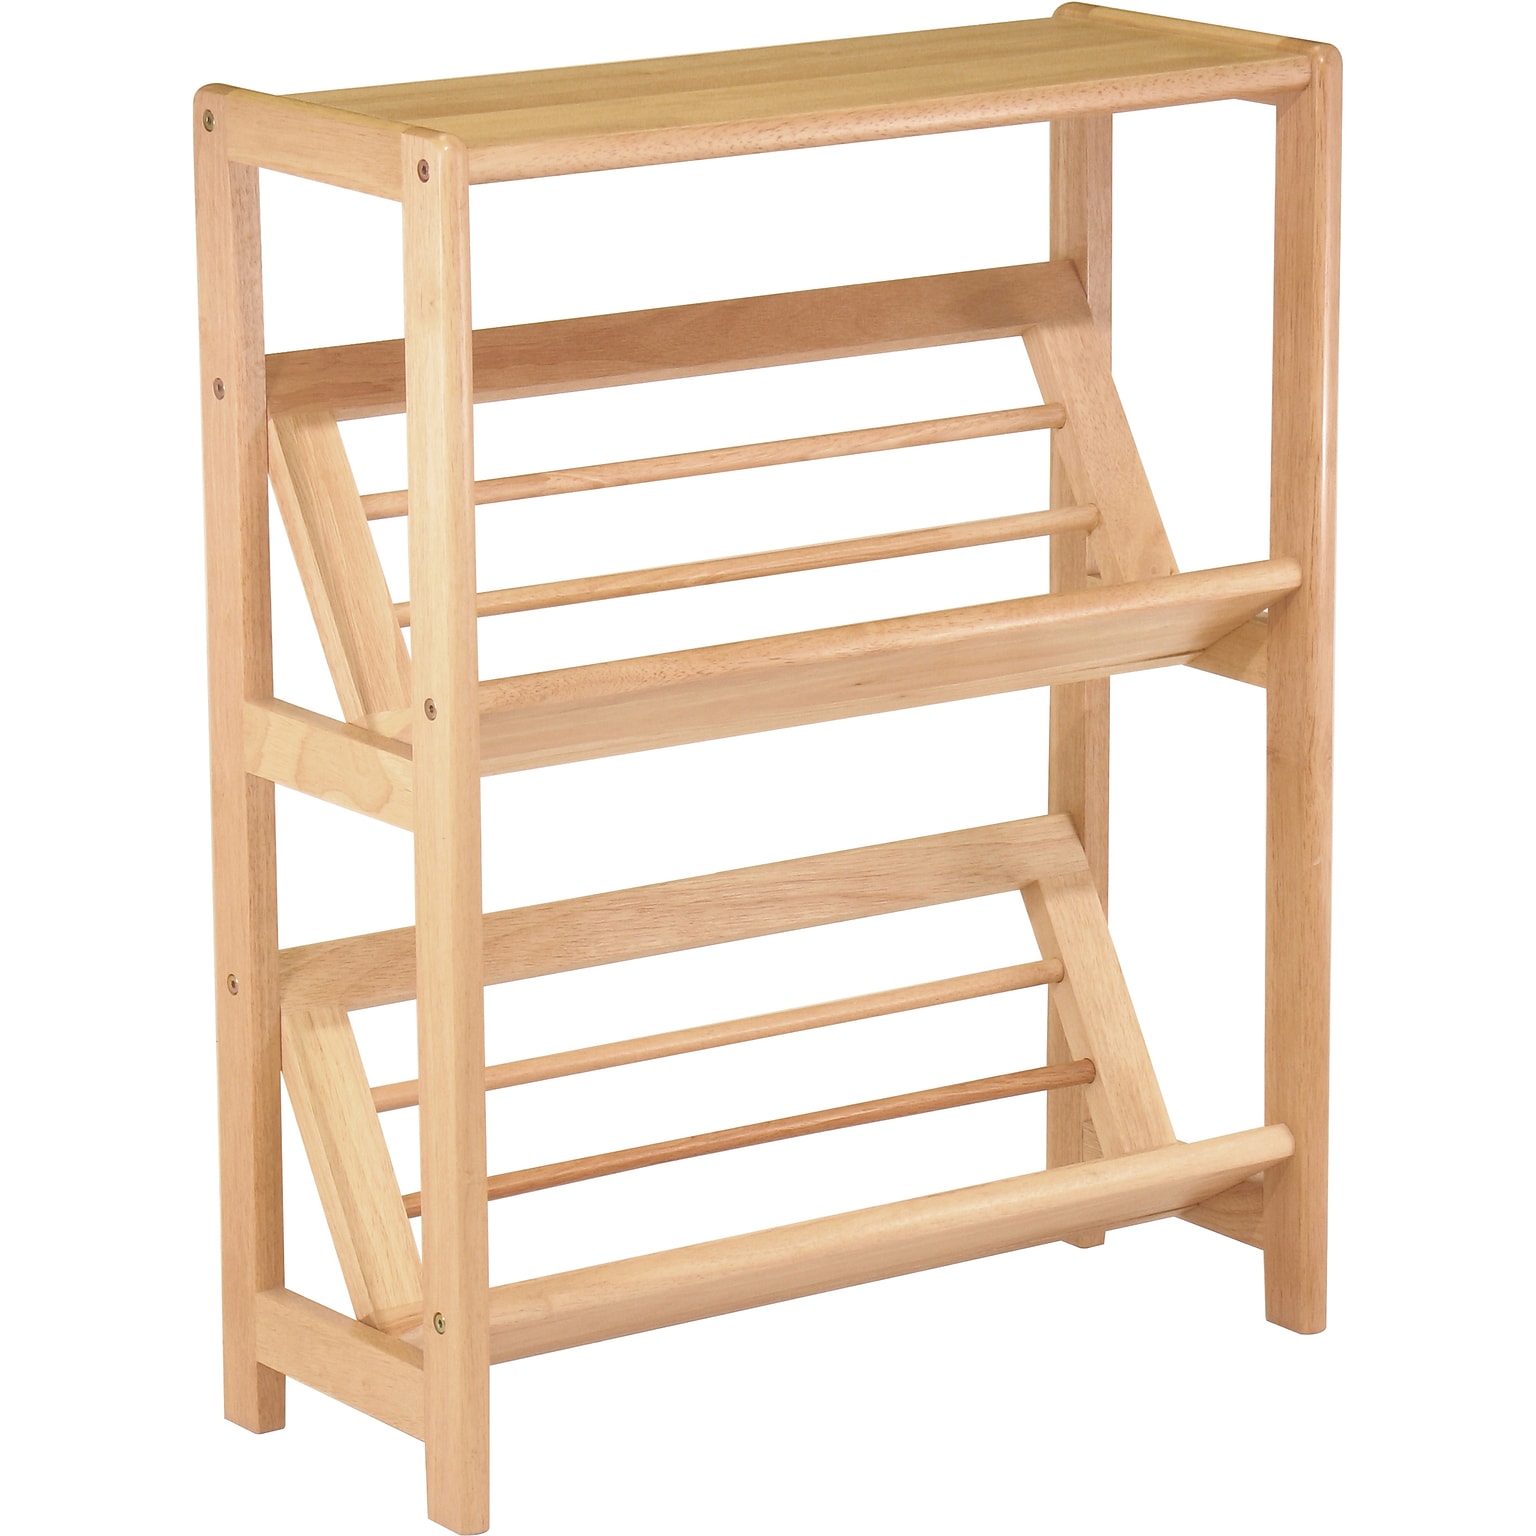 Winsome Mission Beech Wood 4-Tier Bookshelf With Slanted Shelf, Natural